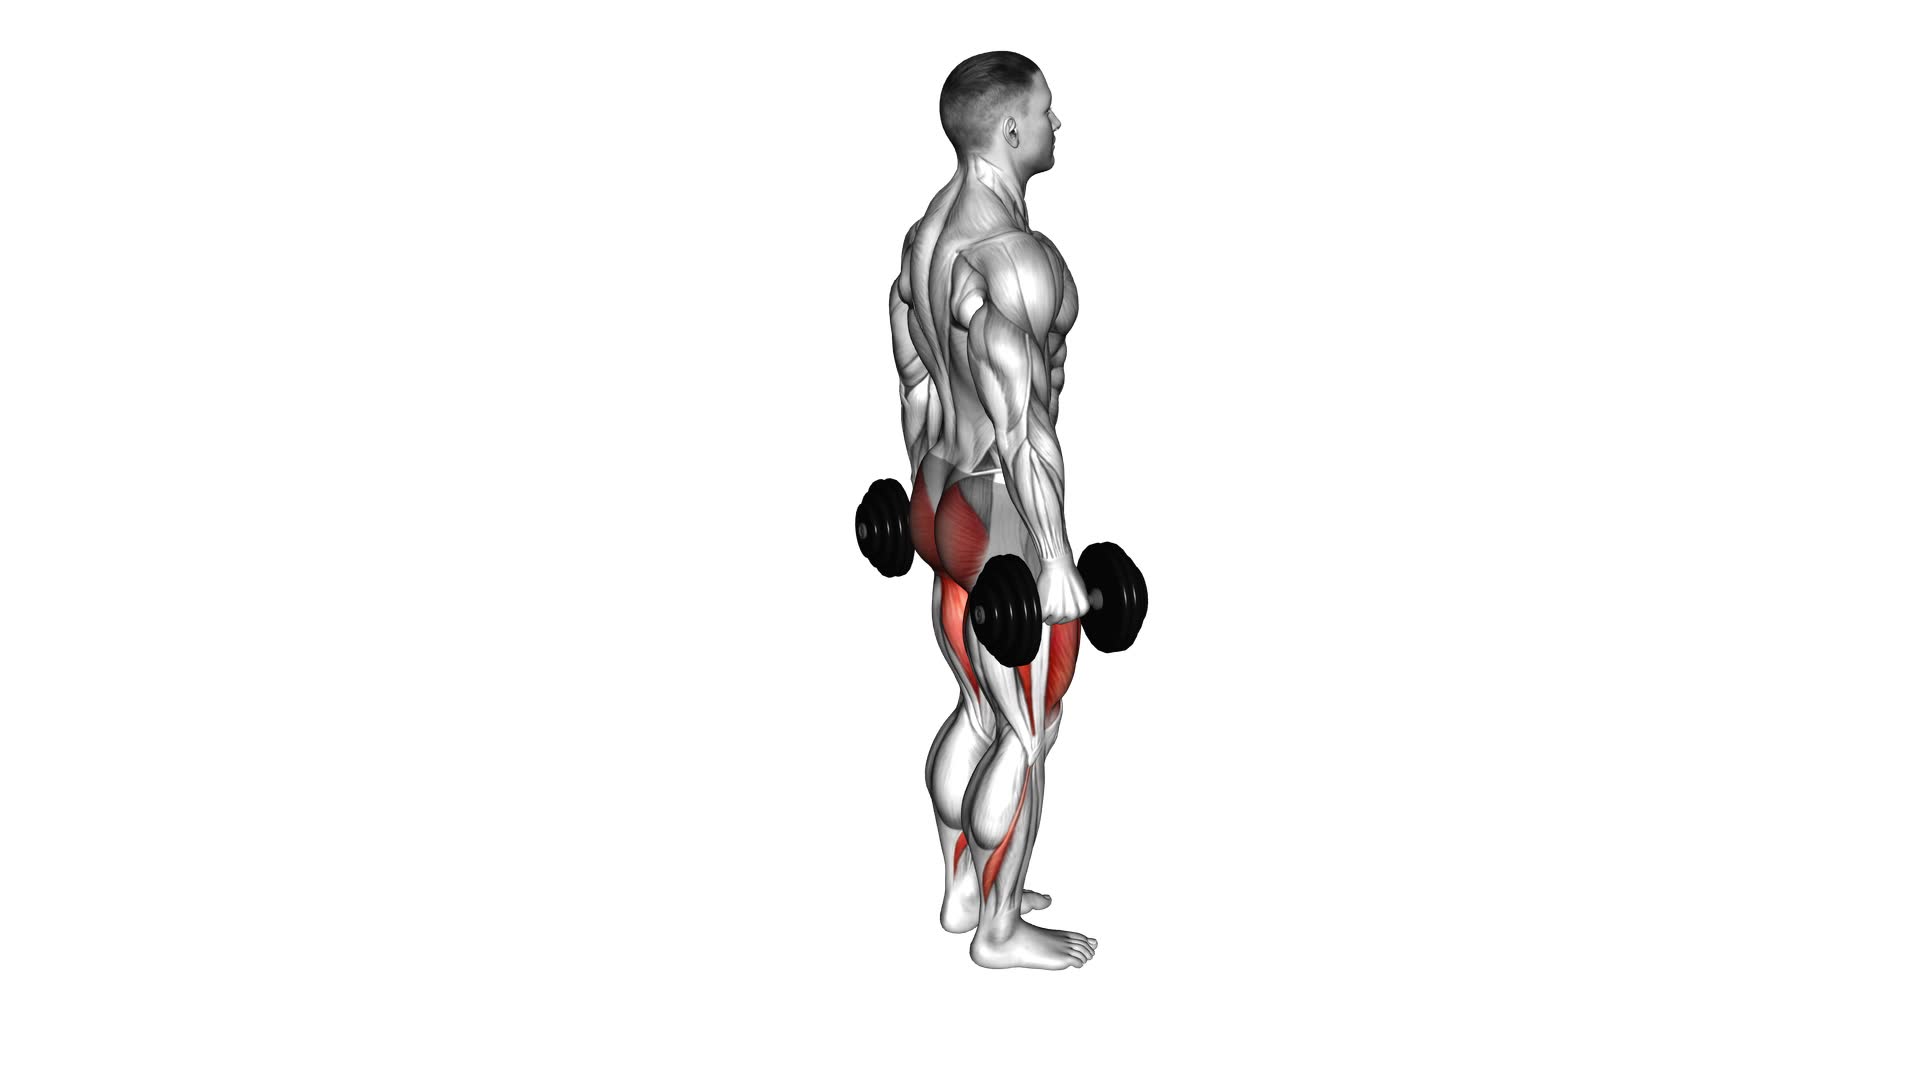 Dumbbell Rear Lunge - Video Exercise Guide & Tips